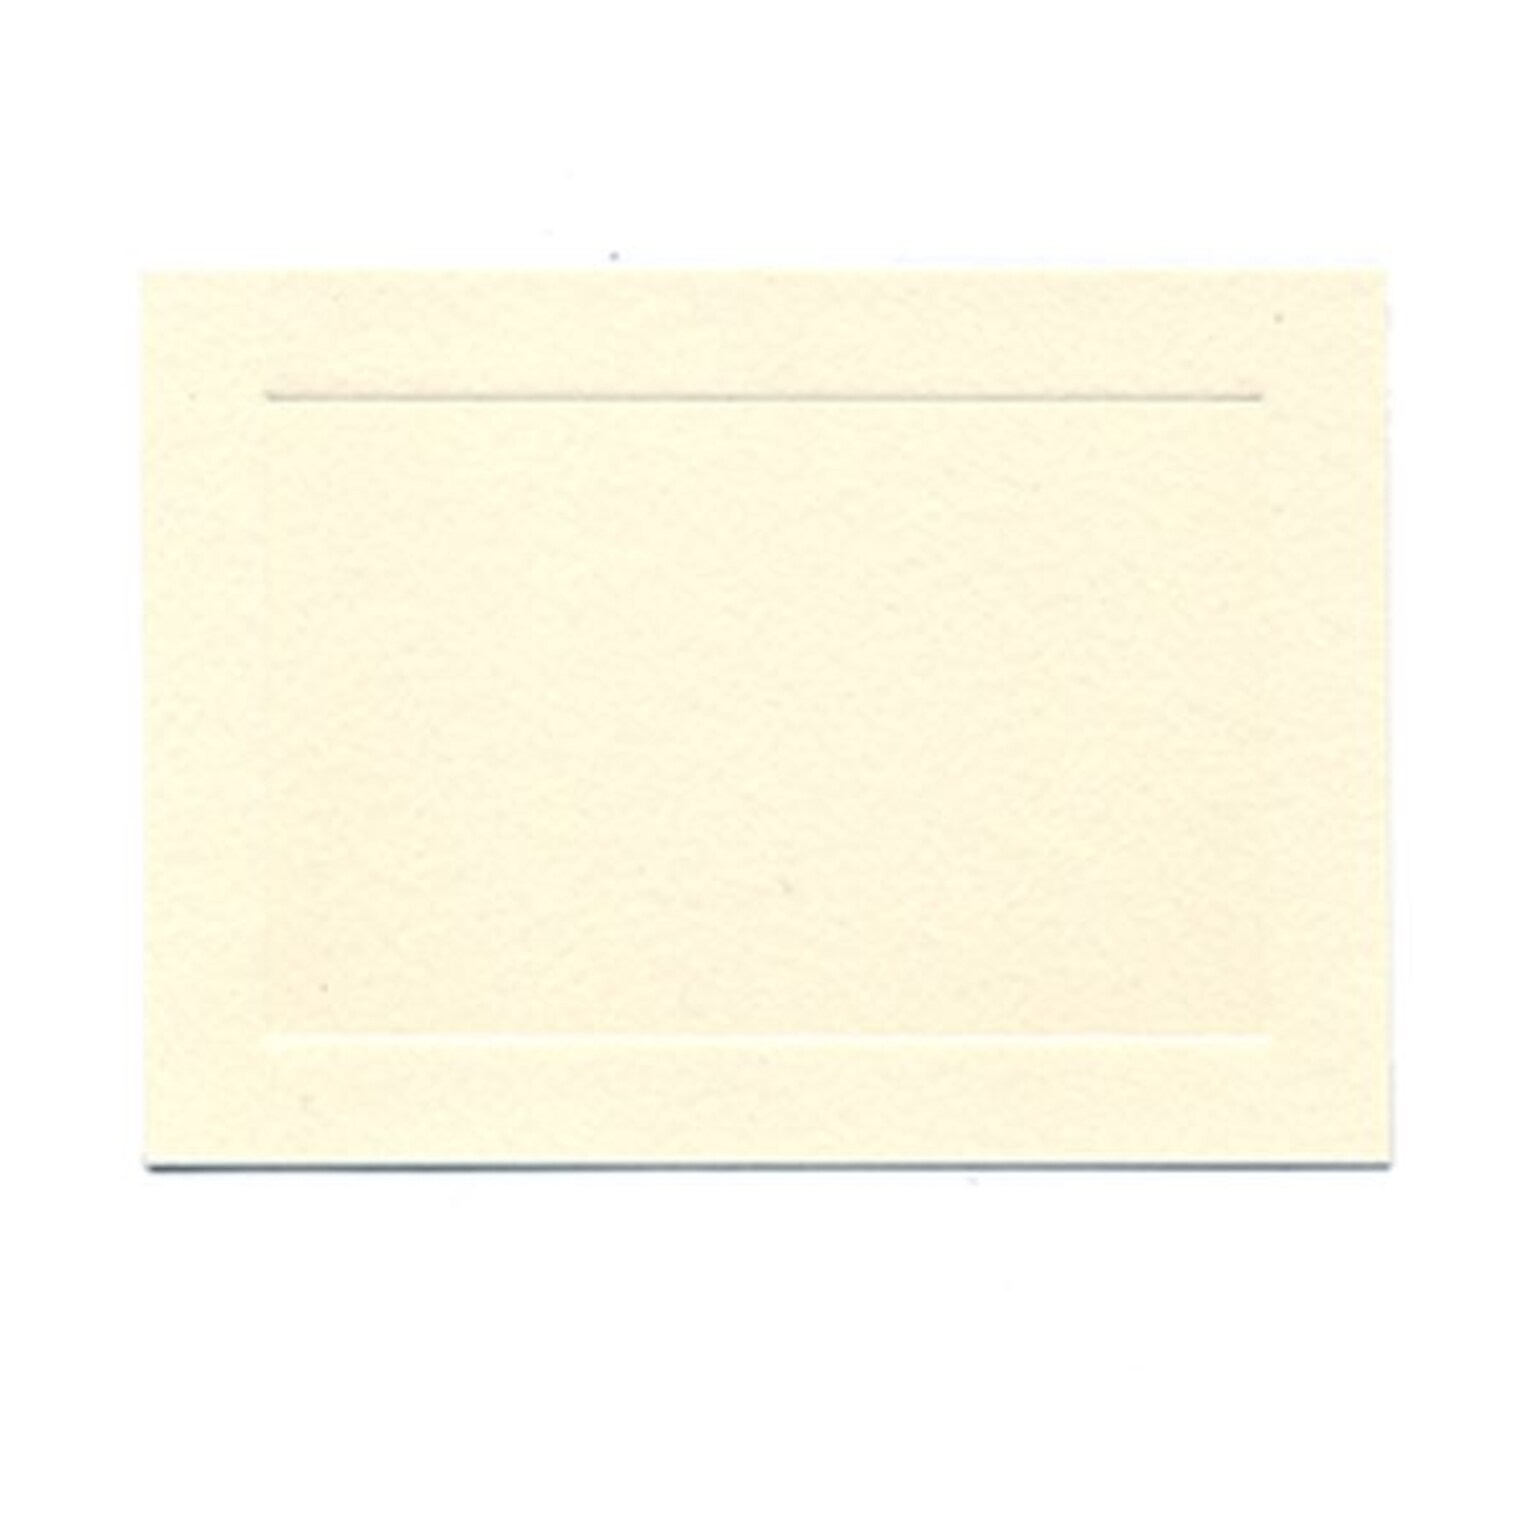 JAM Paper® Blank Note Cards, 4bar size, 3 1/2 x 4 7/8, Ivory, 100/pack (175960)